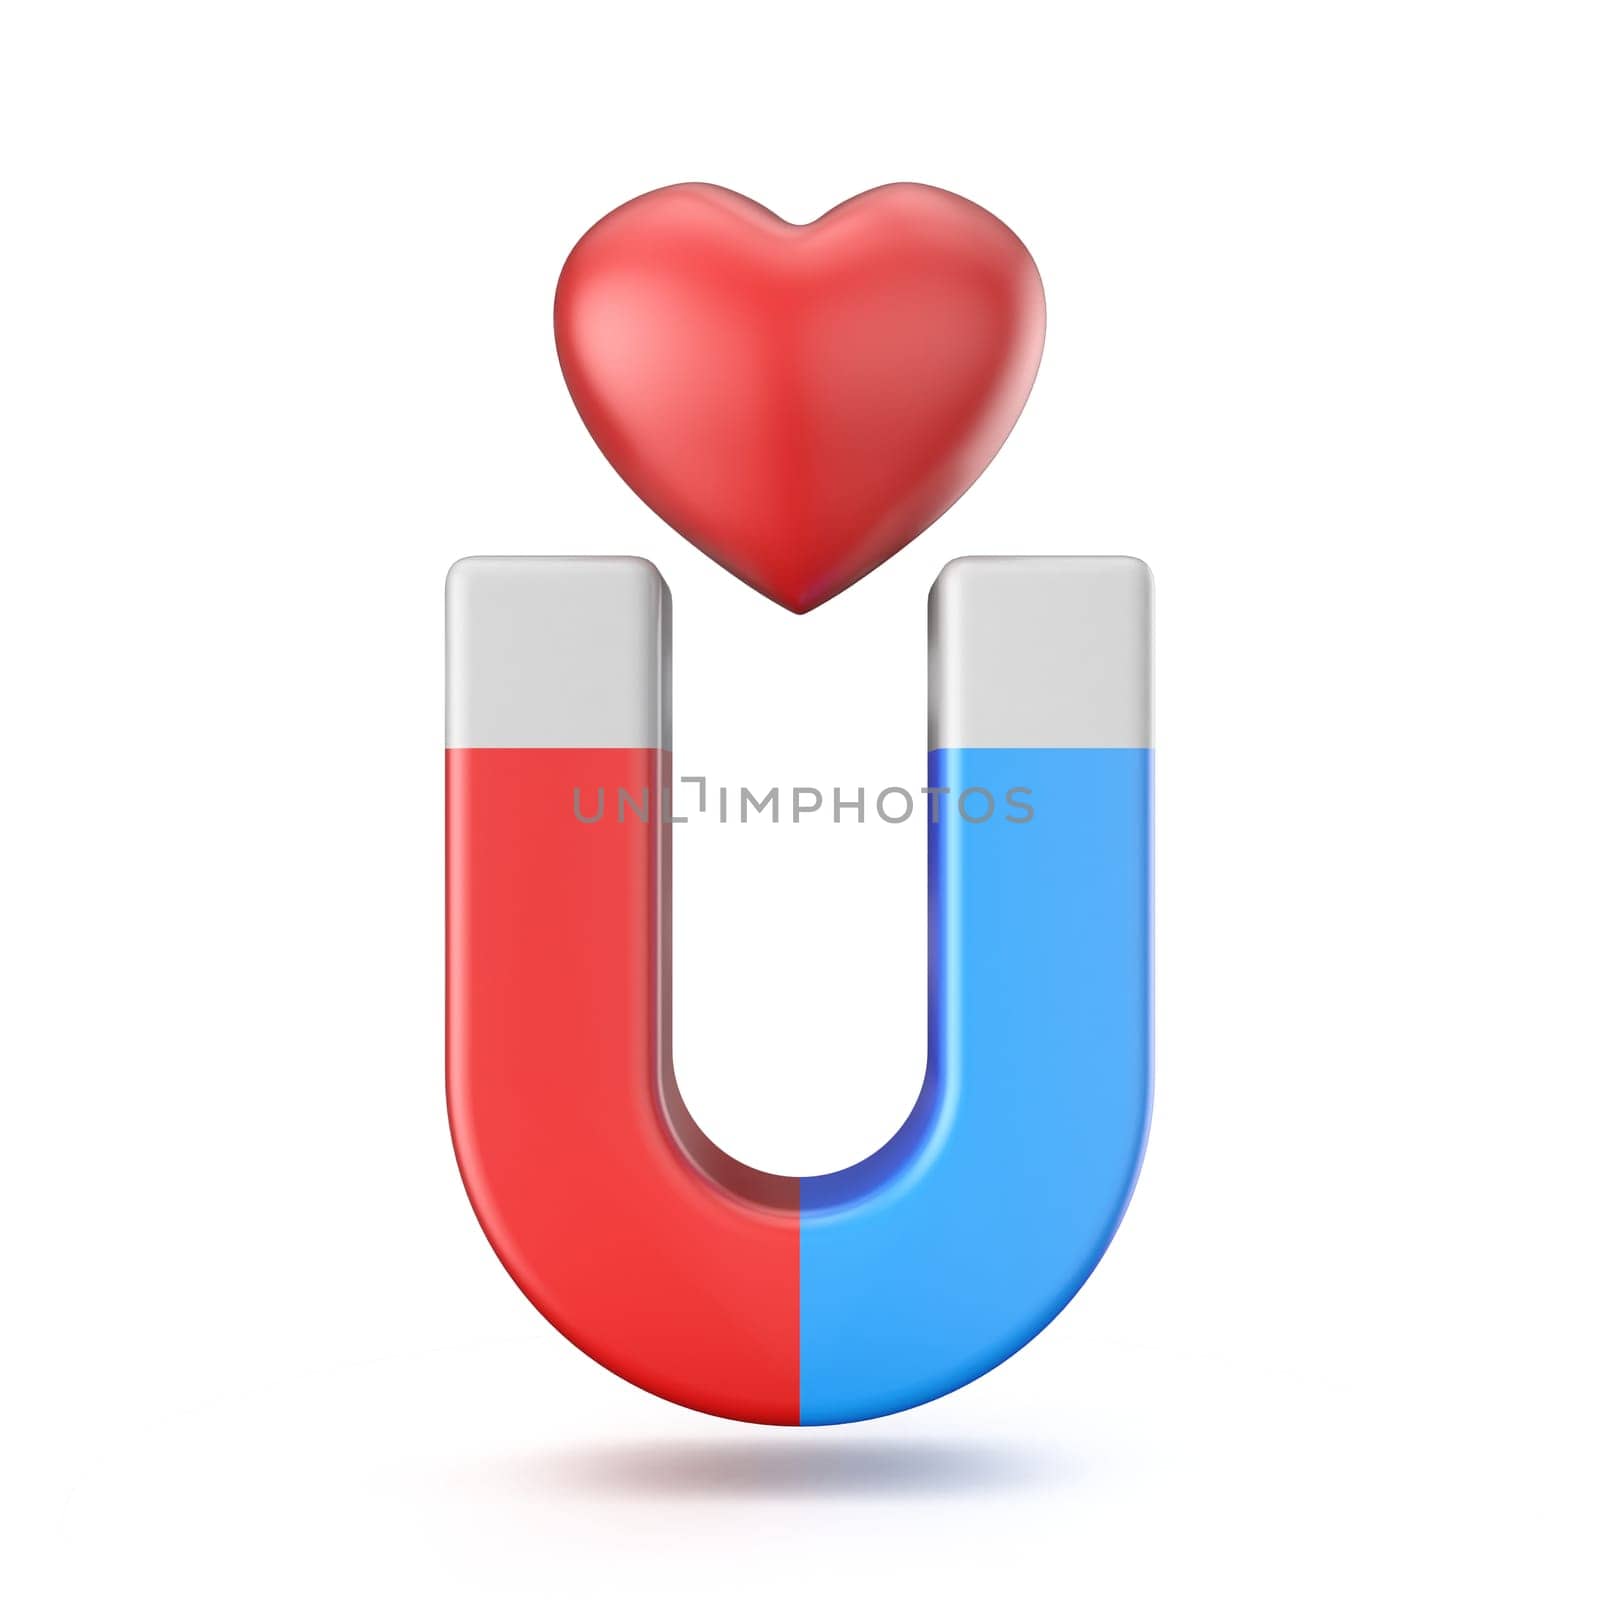 Magnet attract red heart 3D rendering illustration isolated on white background